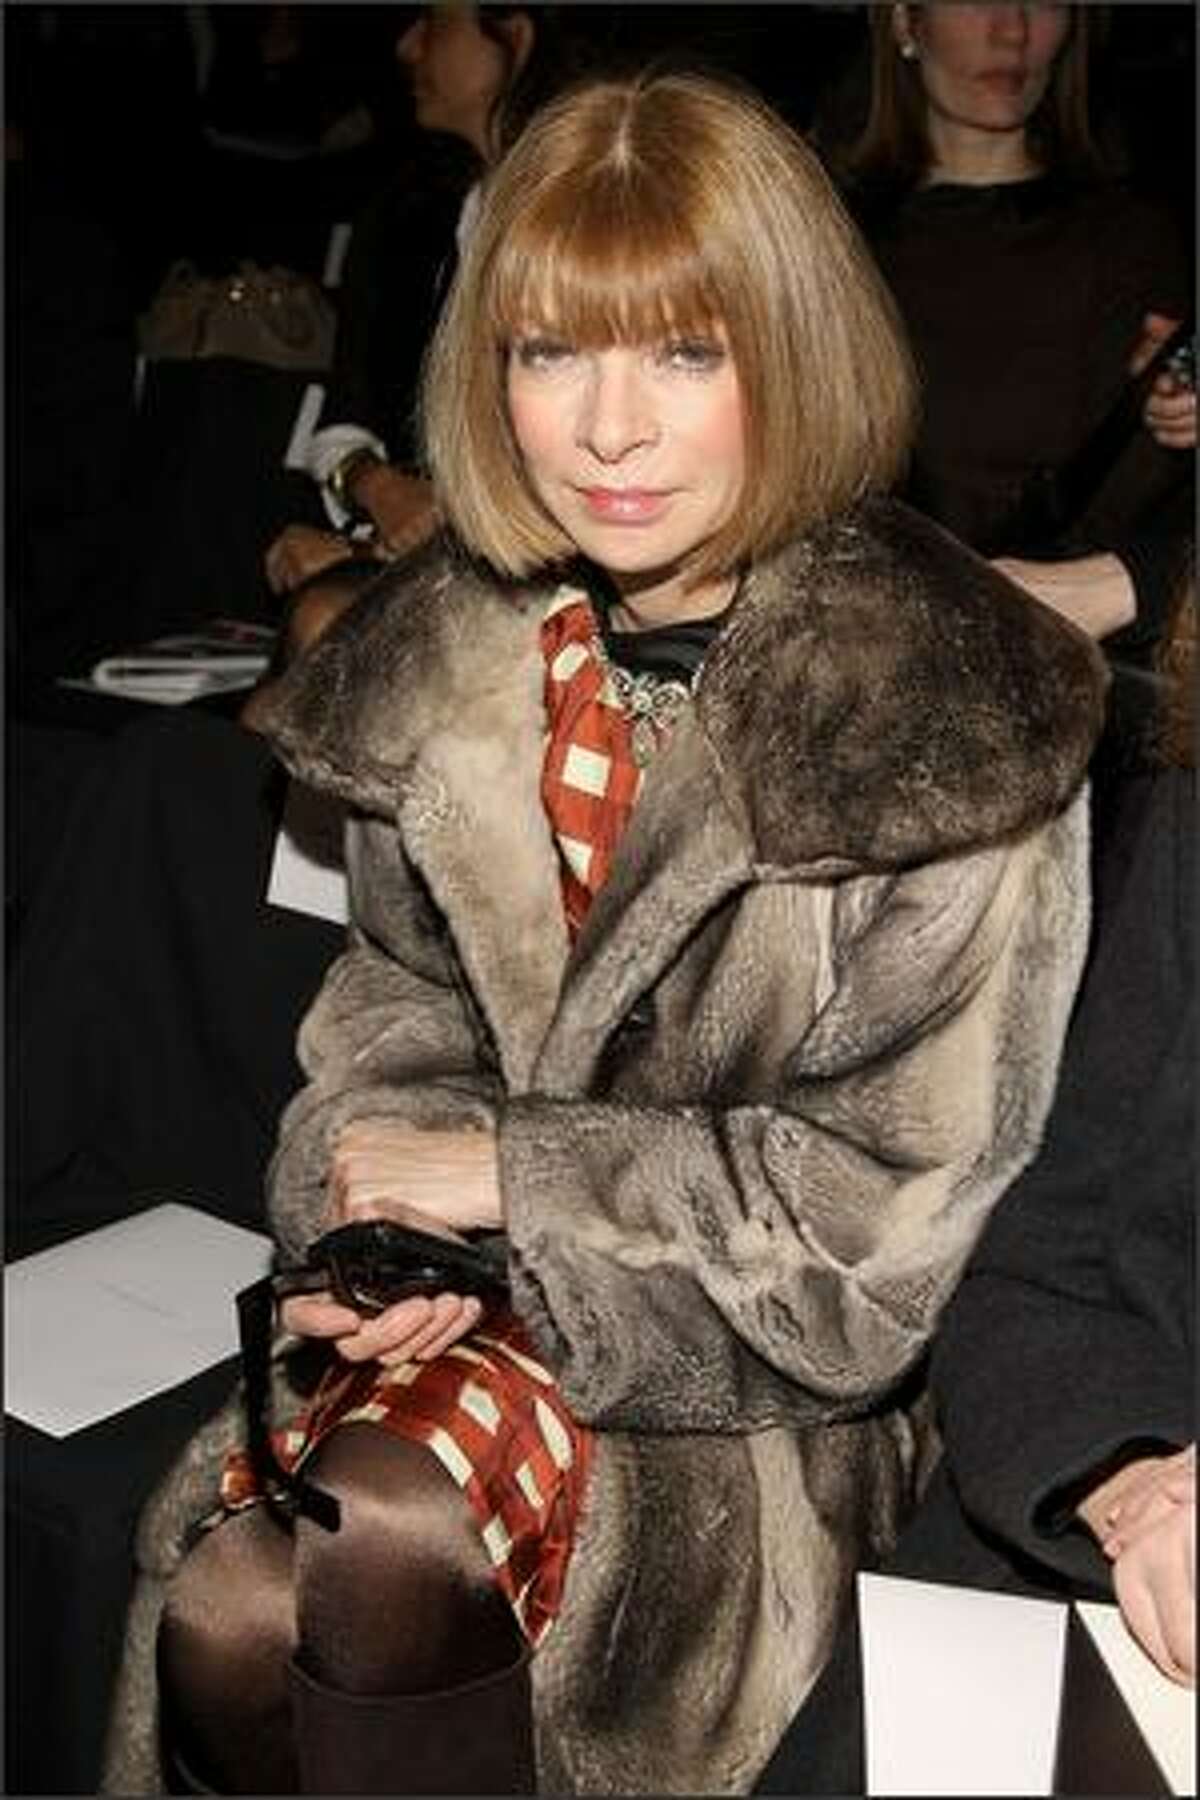 Editor-in-chief of Vogue Anna Wintour attends the Carolina Herrera 2008 fashion show during Mercedes-Benz Fashion Week Fall 2008 at The Tent at Bryant Park in New York City.